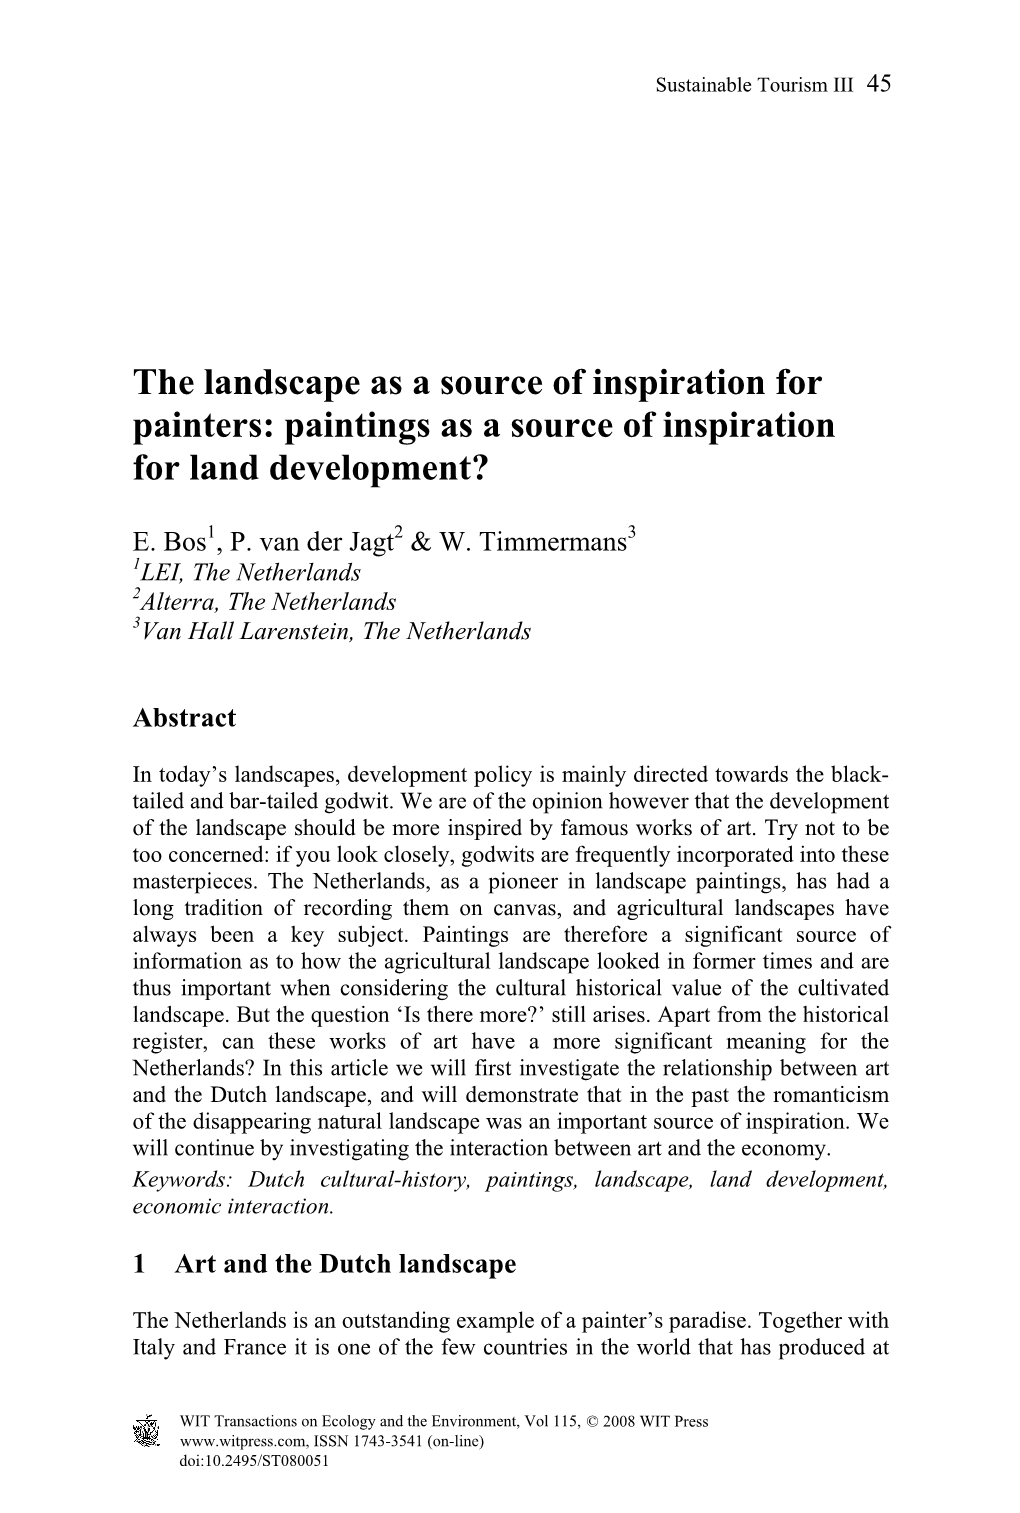 The Landscape As a Source of Inspiration for Painters: Paintings As a Source of Inspiration for Land Development?